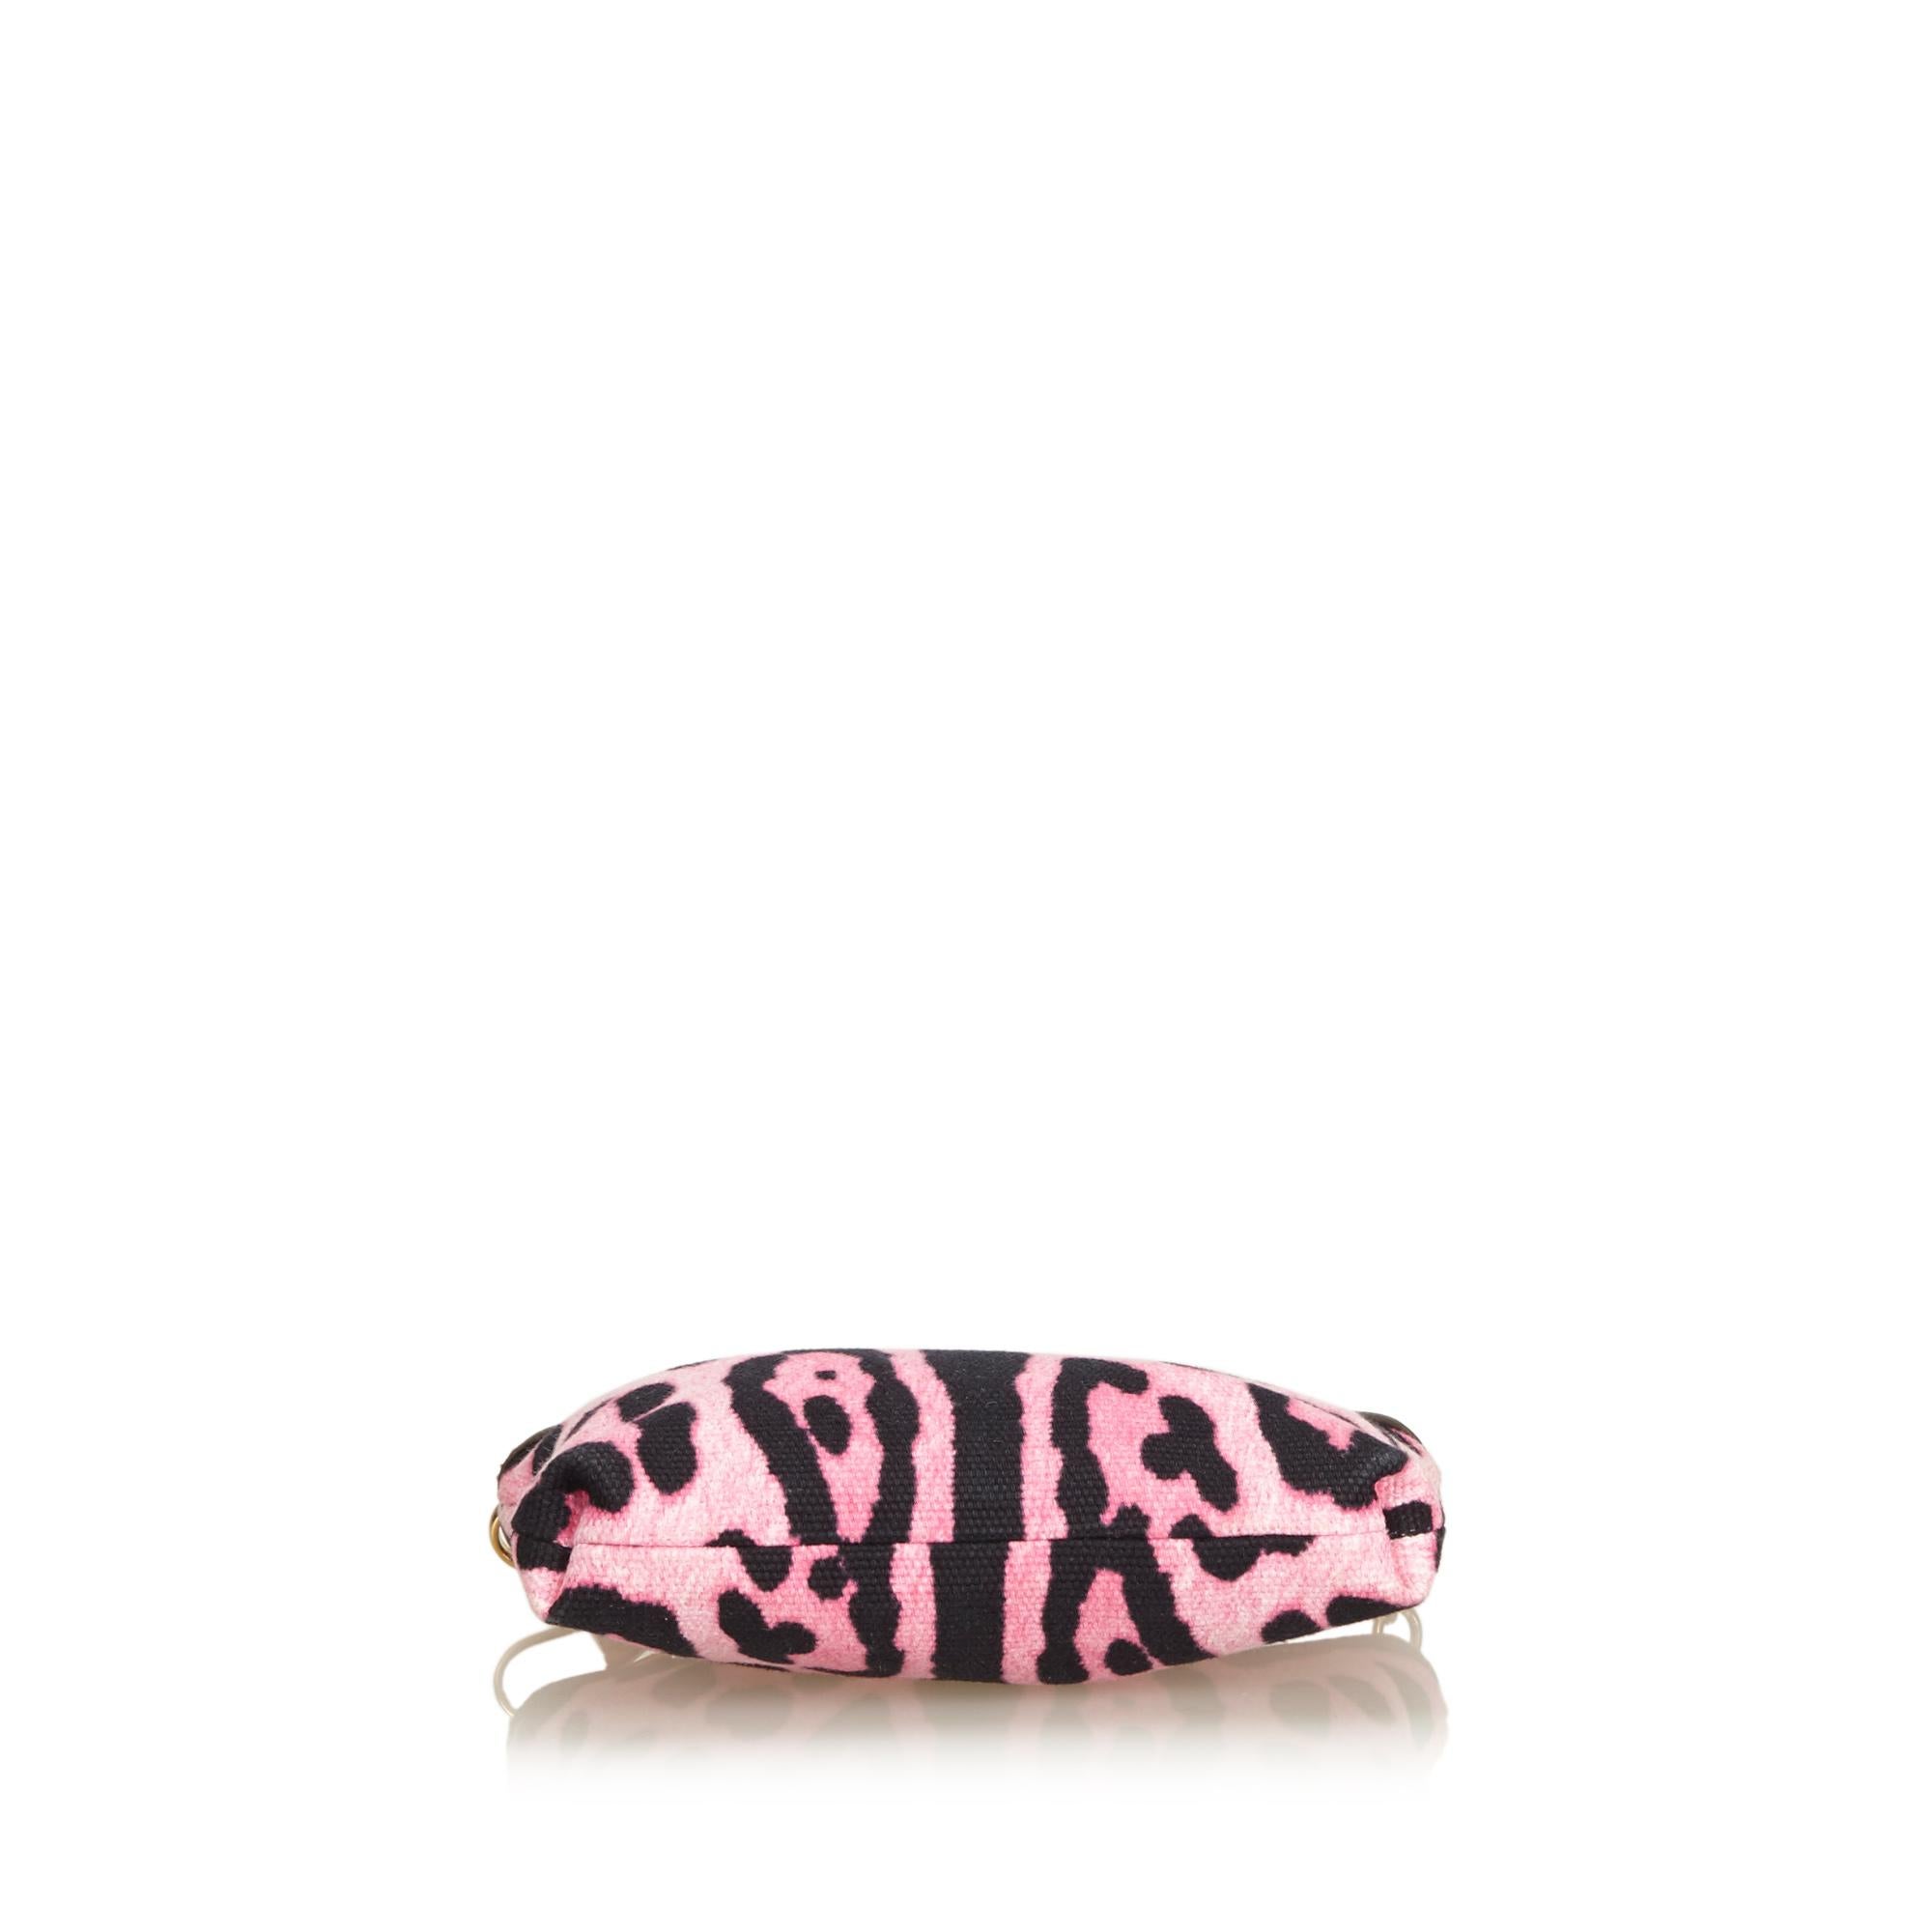 Dolce&Gabbana Pink Leopard Printed Canvas Baguette In Good Condition For Sale In Orlando, FL